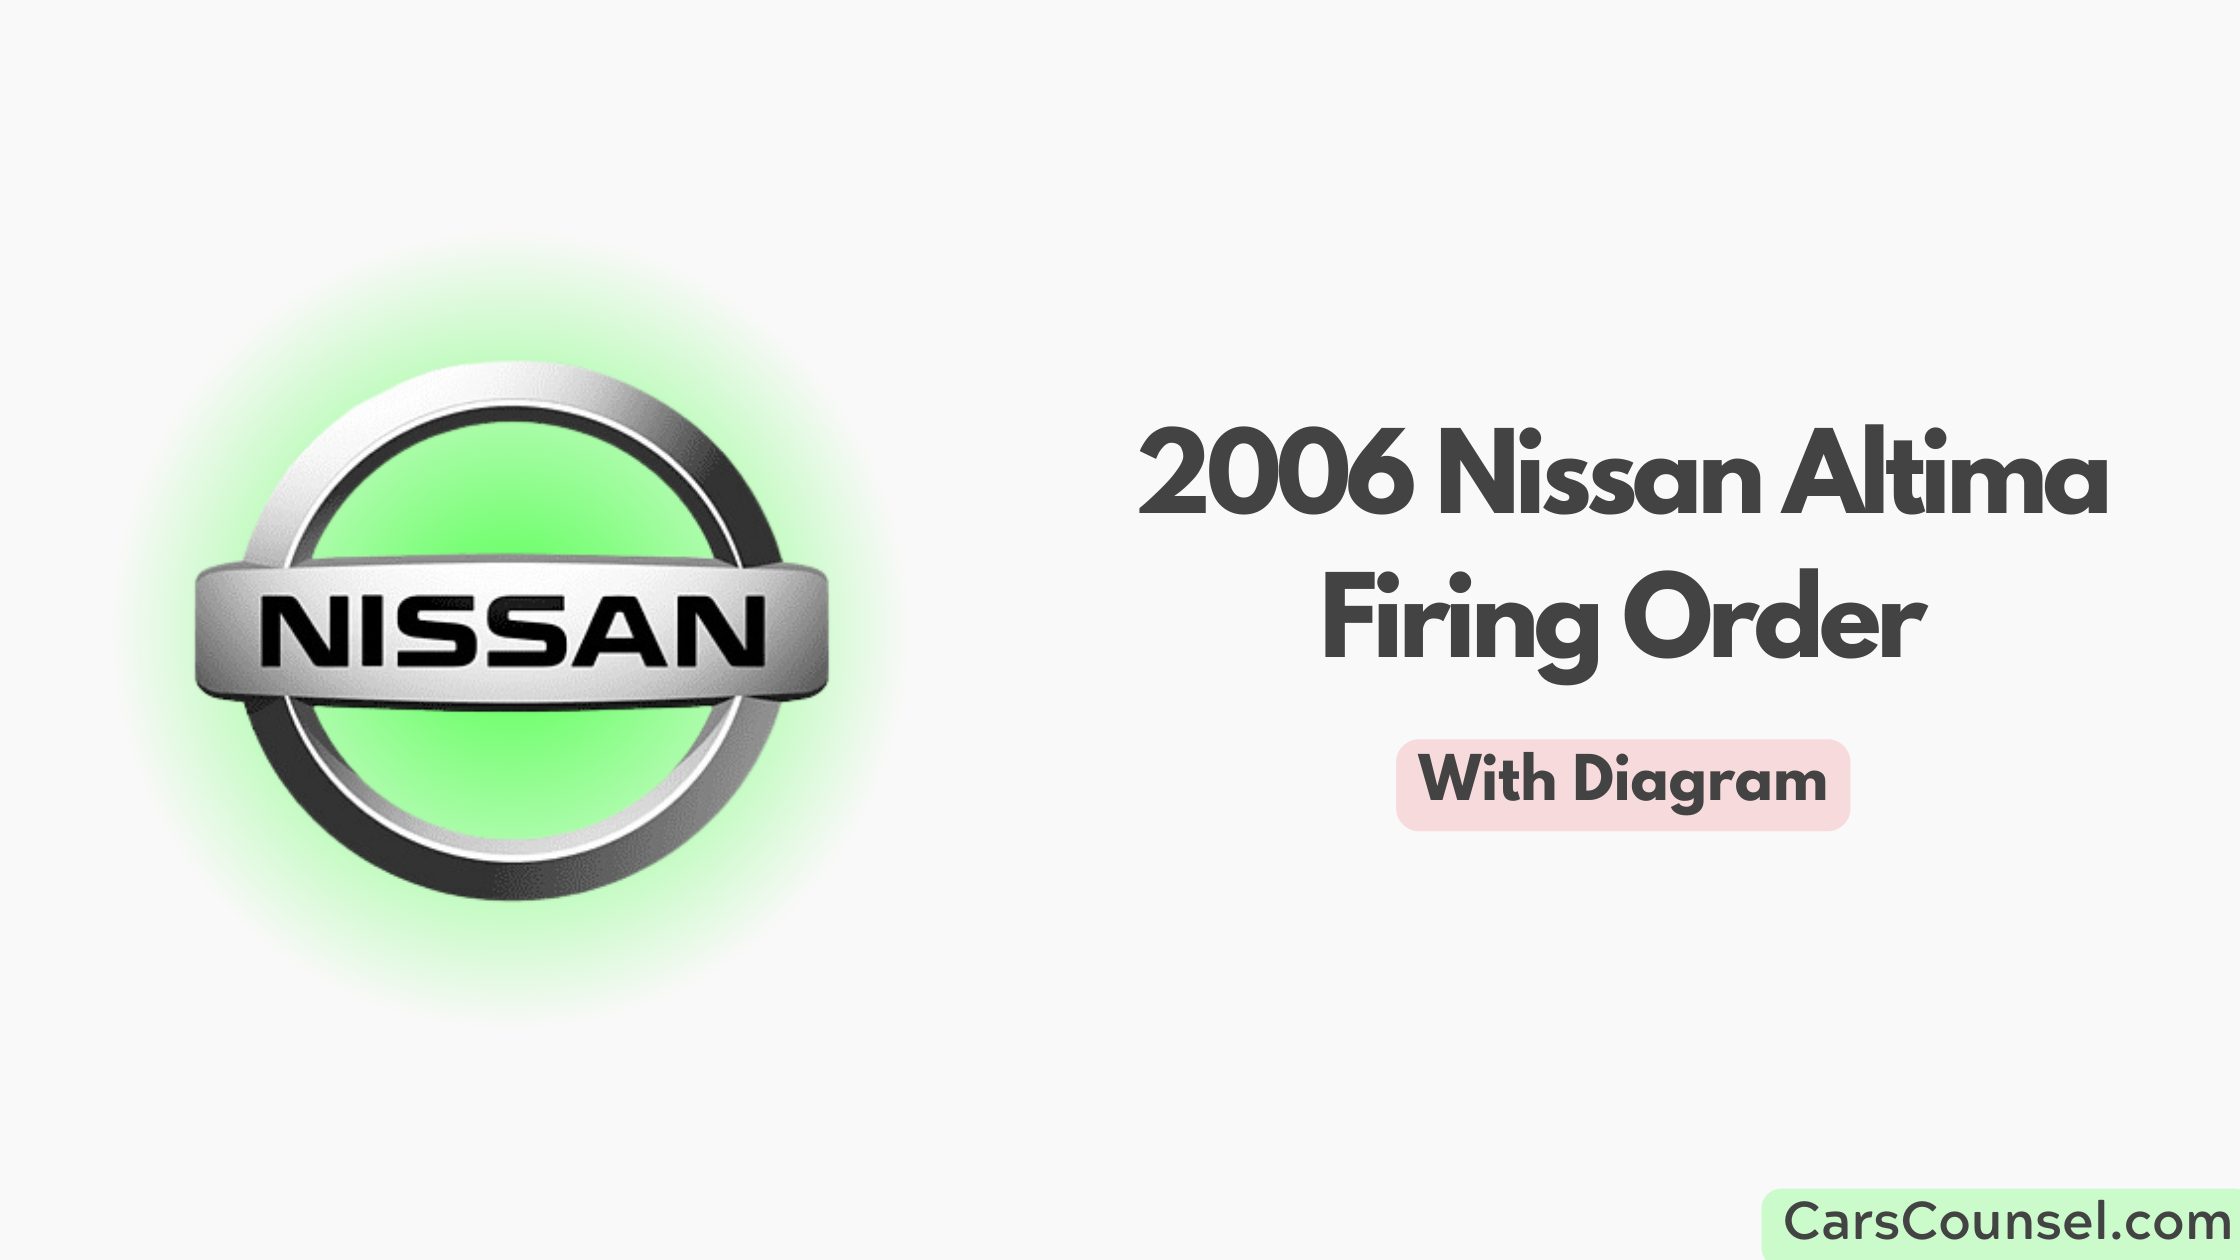 2006 Nissan Altima Firing Order With Diagram